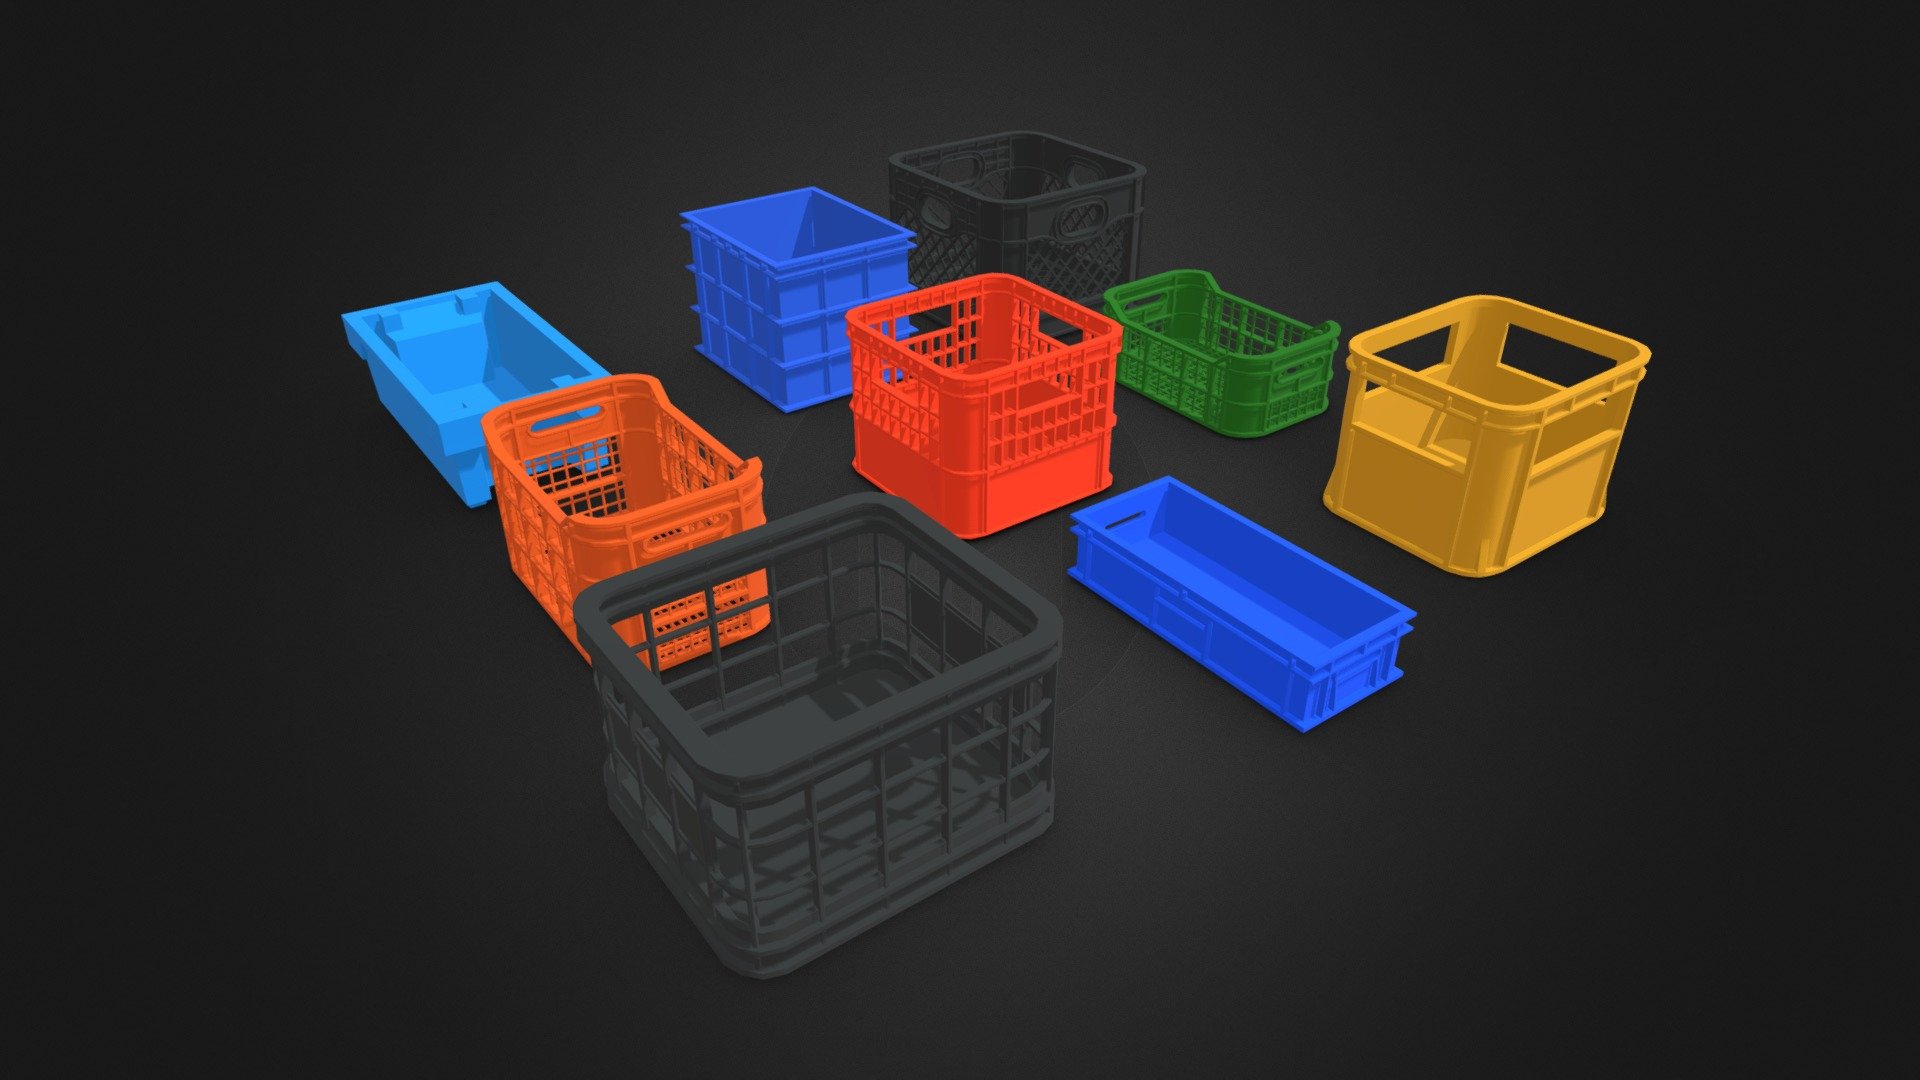 Plastic Crate 3D Model by ChakkitPP.




This model was developed in Blender 2.90.1

Unwrapped Non-overlapping and UV Mapping

Beveled Smooth Edges, No Subdivision modifier.


No Plugins used.




High Quality 3D Model.



Objects Detail :




Plastic Crate 1 Polygons 4396 / Vertices 4392

Plastic Crate 2 Polygons 14248 / Vertices 14166

Plastic Crate 3 Polygons 8248 / Vertices 8282

Plastic Crate 4 Polygons 3180 / Vertices 3206

Plastic Crate 5 Polygons 7464 / Vertices 8336

Plastic Crate 6 Polygons 11132 / Vertices 12848

Plastic Crate 7 Polygons 2960 / Vertices 3190

Plastic Crate 8 Polygons 8568 / Vertices 9576

Plastic Crate 9 Polygons 1628 / Vertices 1630

File Includes : 




fbx, obj / mtl, stl, blend
 - Plastic Crate - Buy Royalty Free 3D model by ChakkitPP 3d model